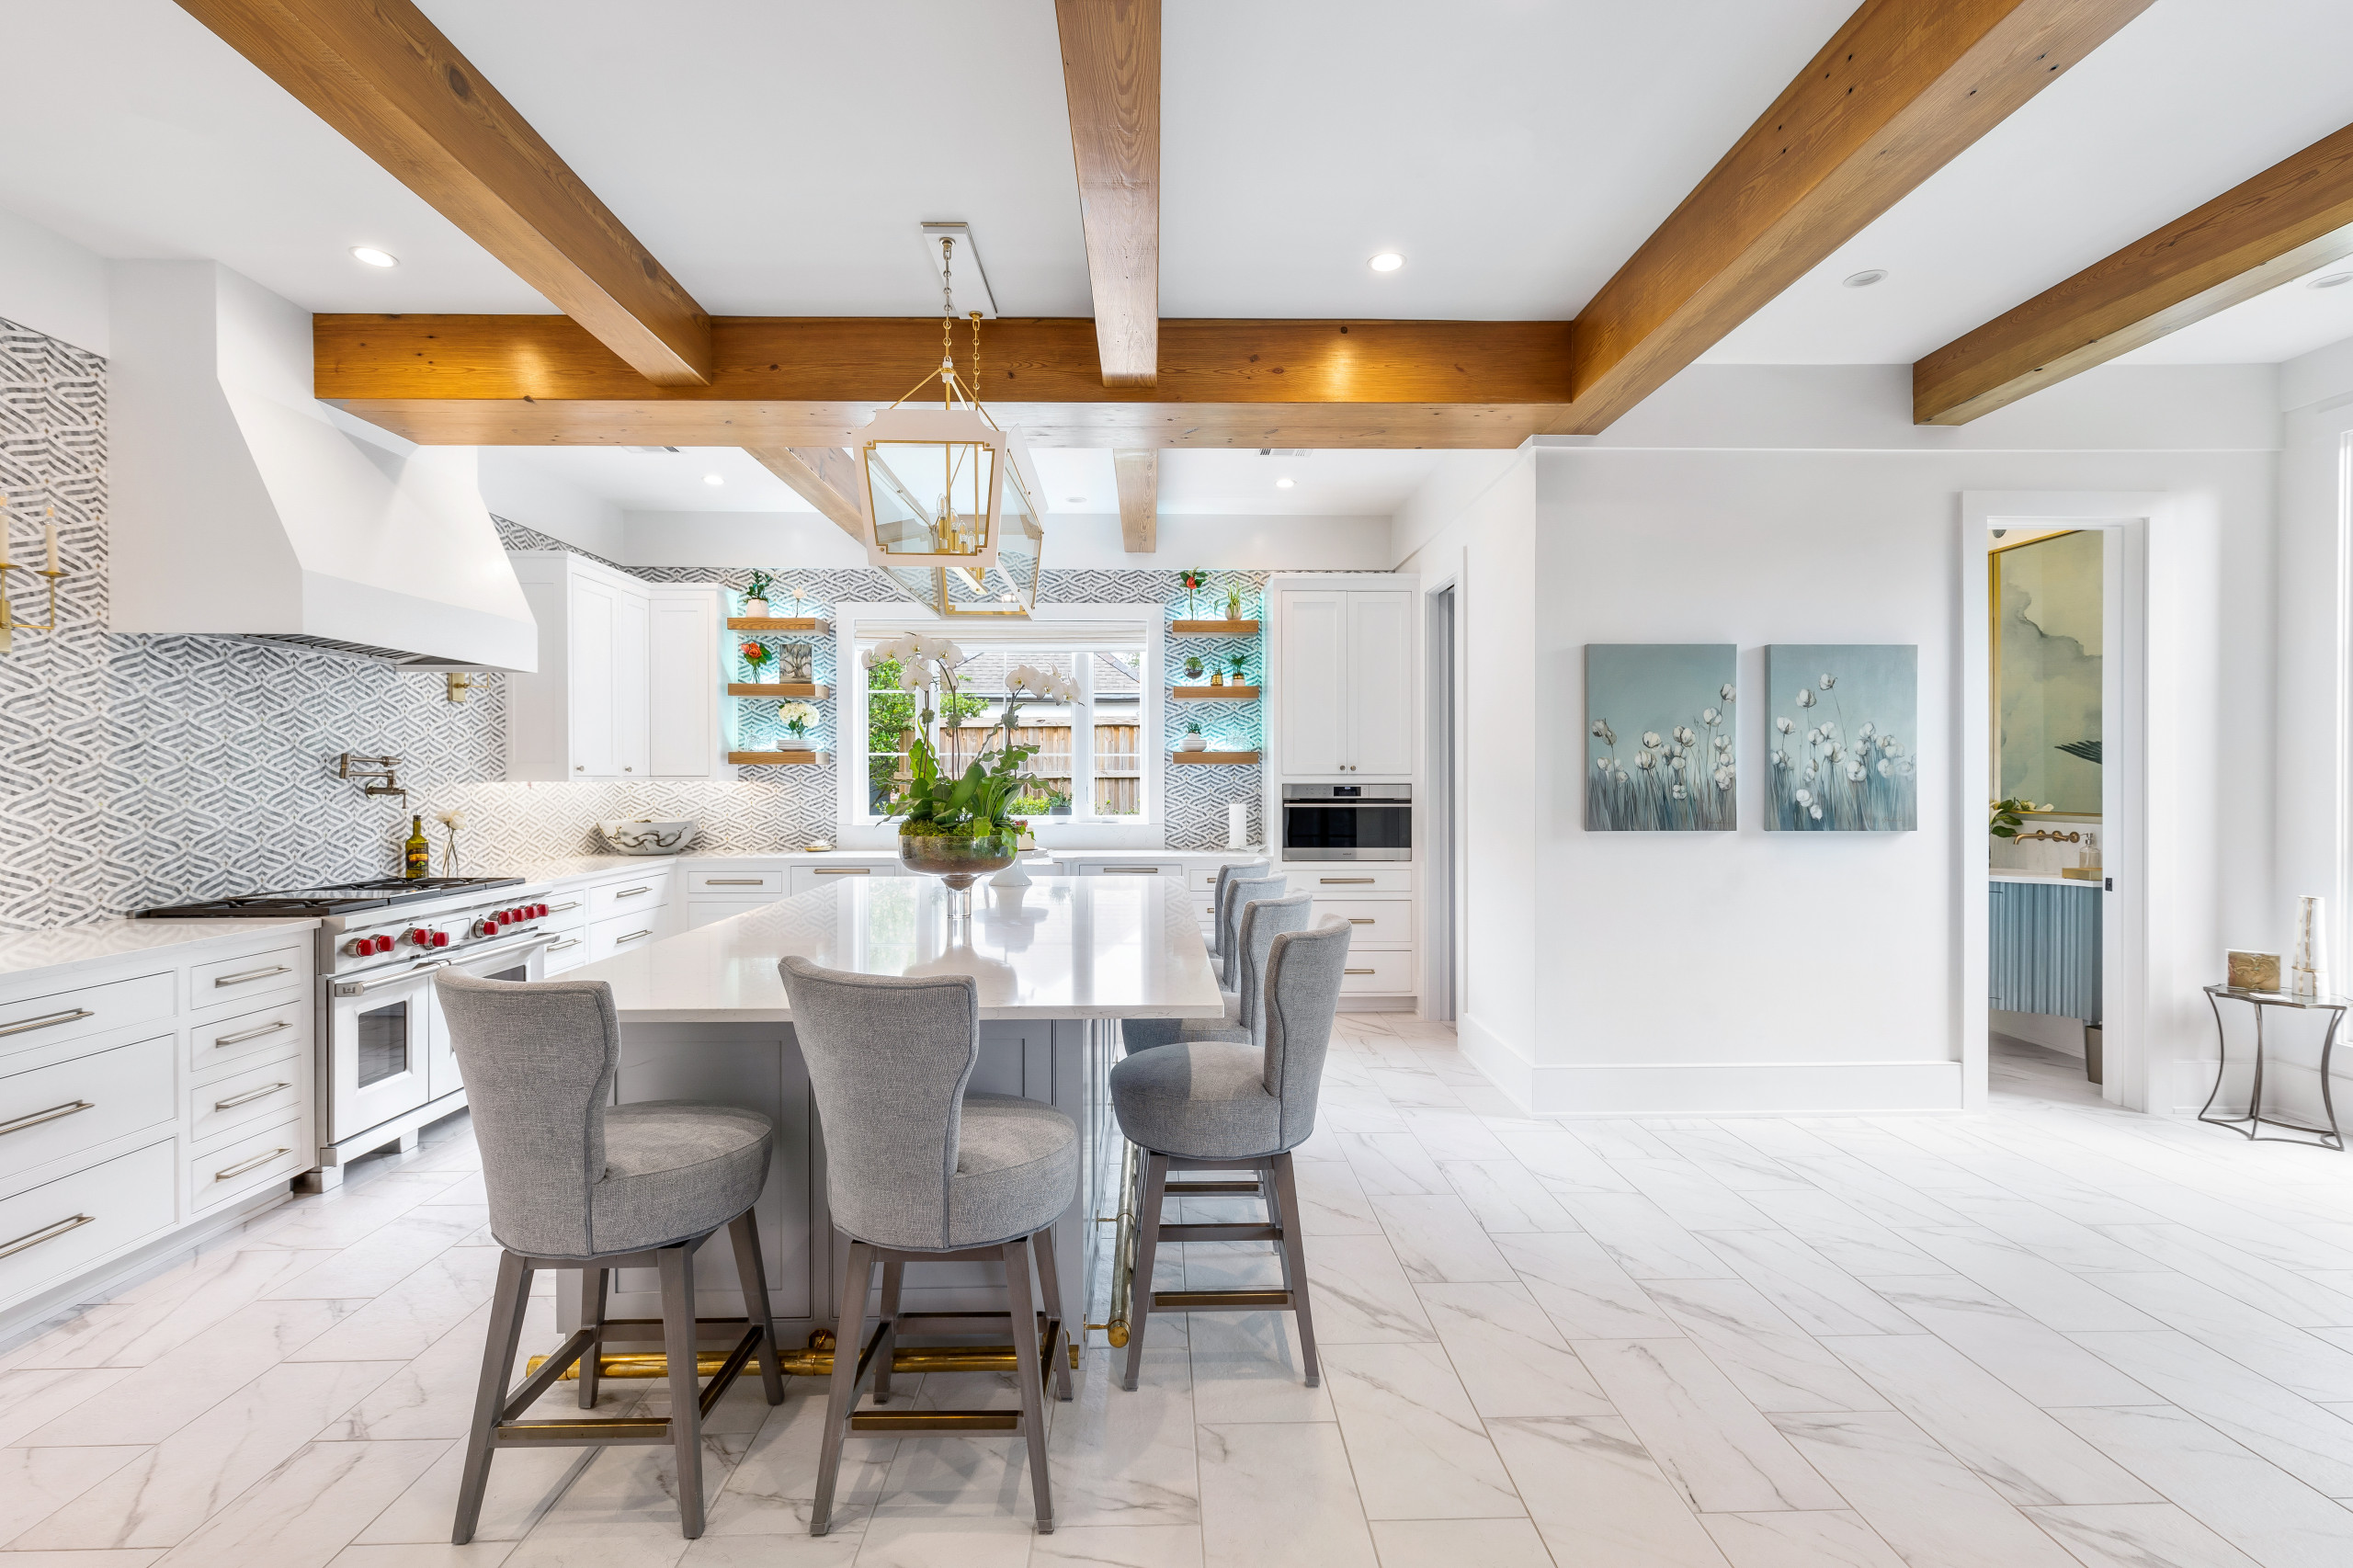 Beautiful open spacing floor plan for the kitchen, the white walls compliment the marble tile flooring. Engineered beams and floating shelves with blue accents in the  backsplash and decor.